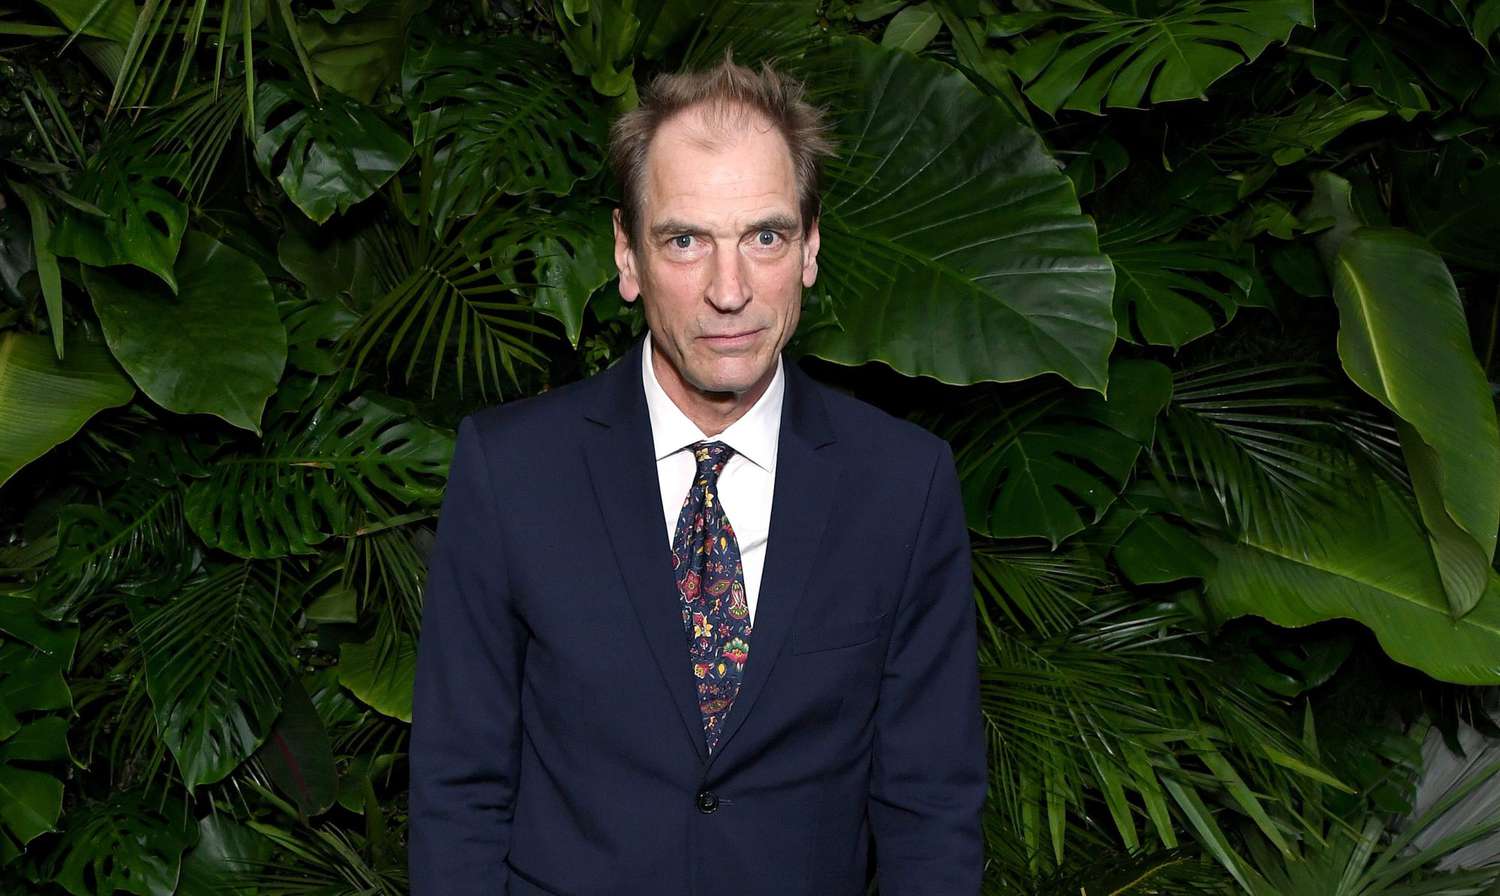 Search for Julian Sands resumes, months after his disappearance while hiking